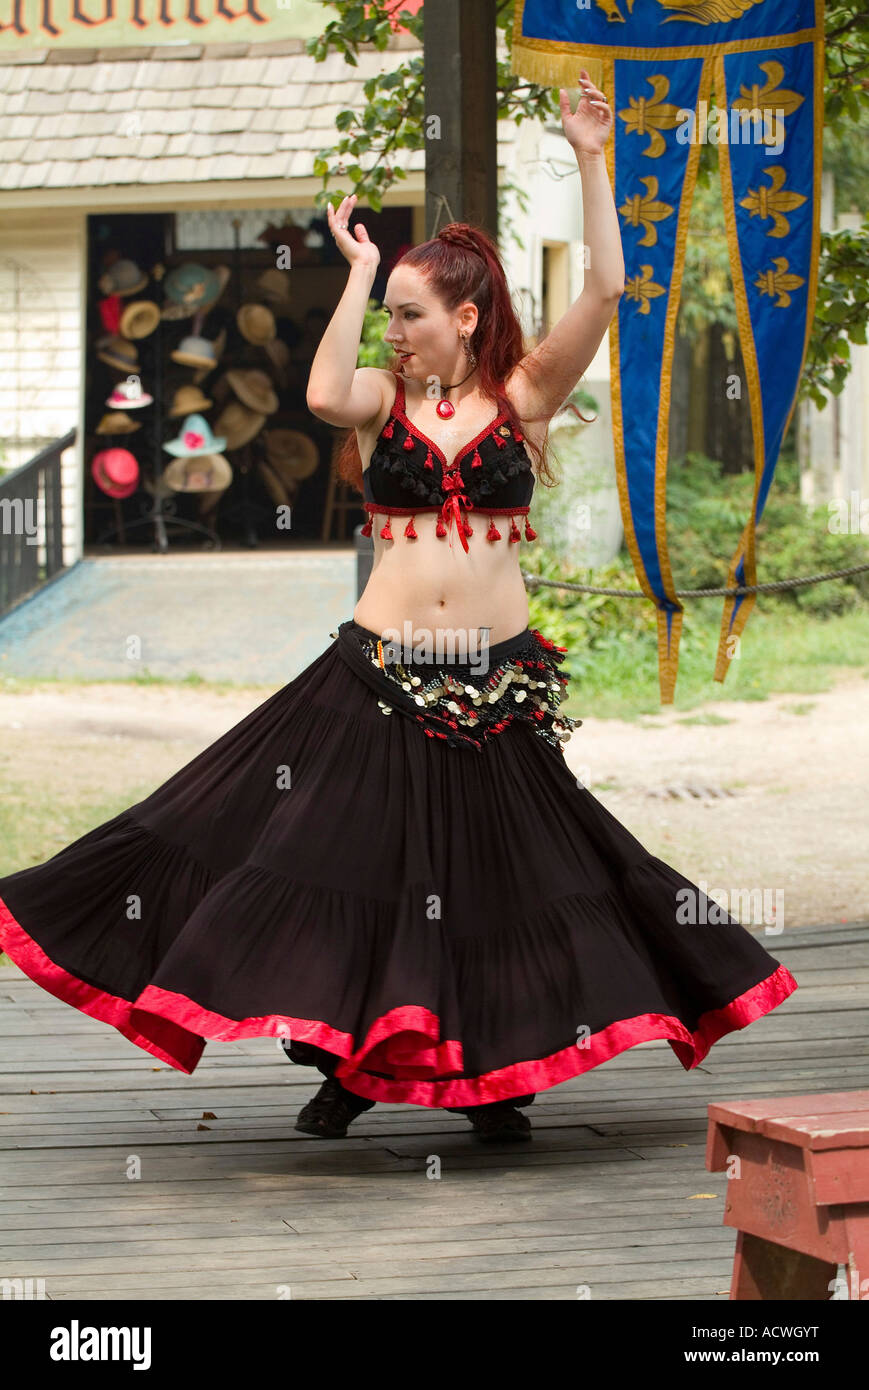 Gypsy Stage Performance Clothing Tribal Belly Dance Costume Spiral